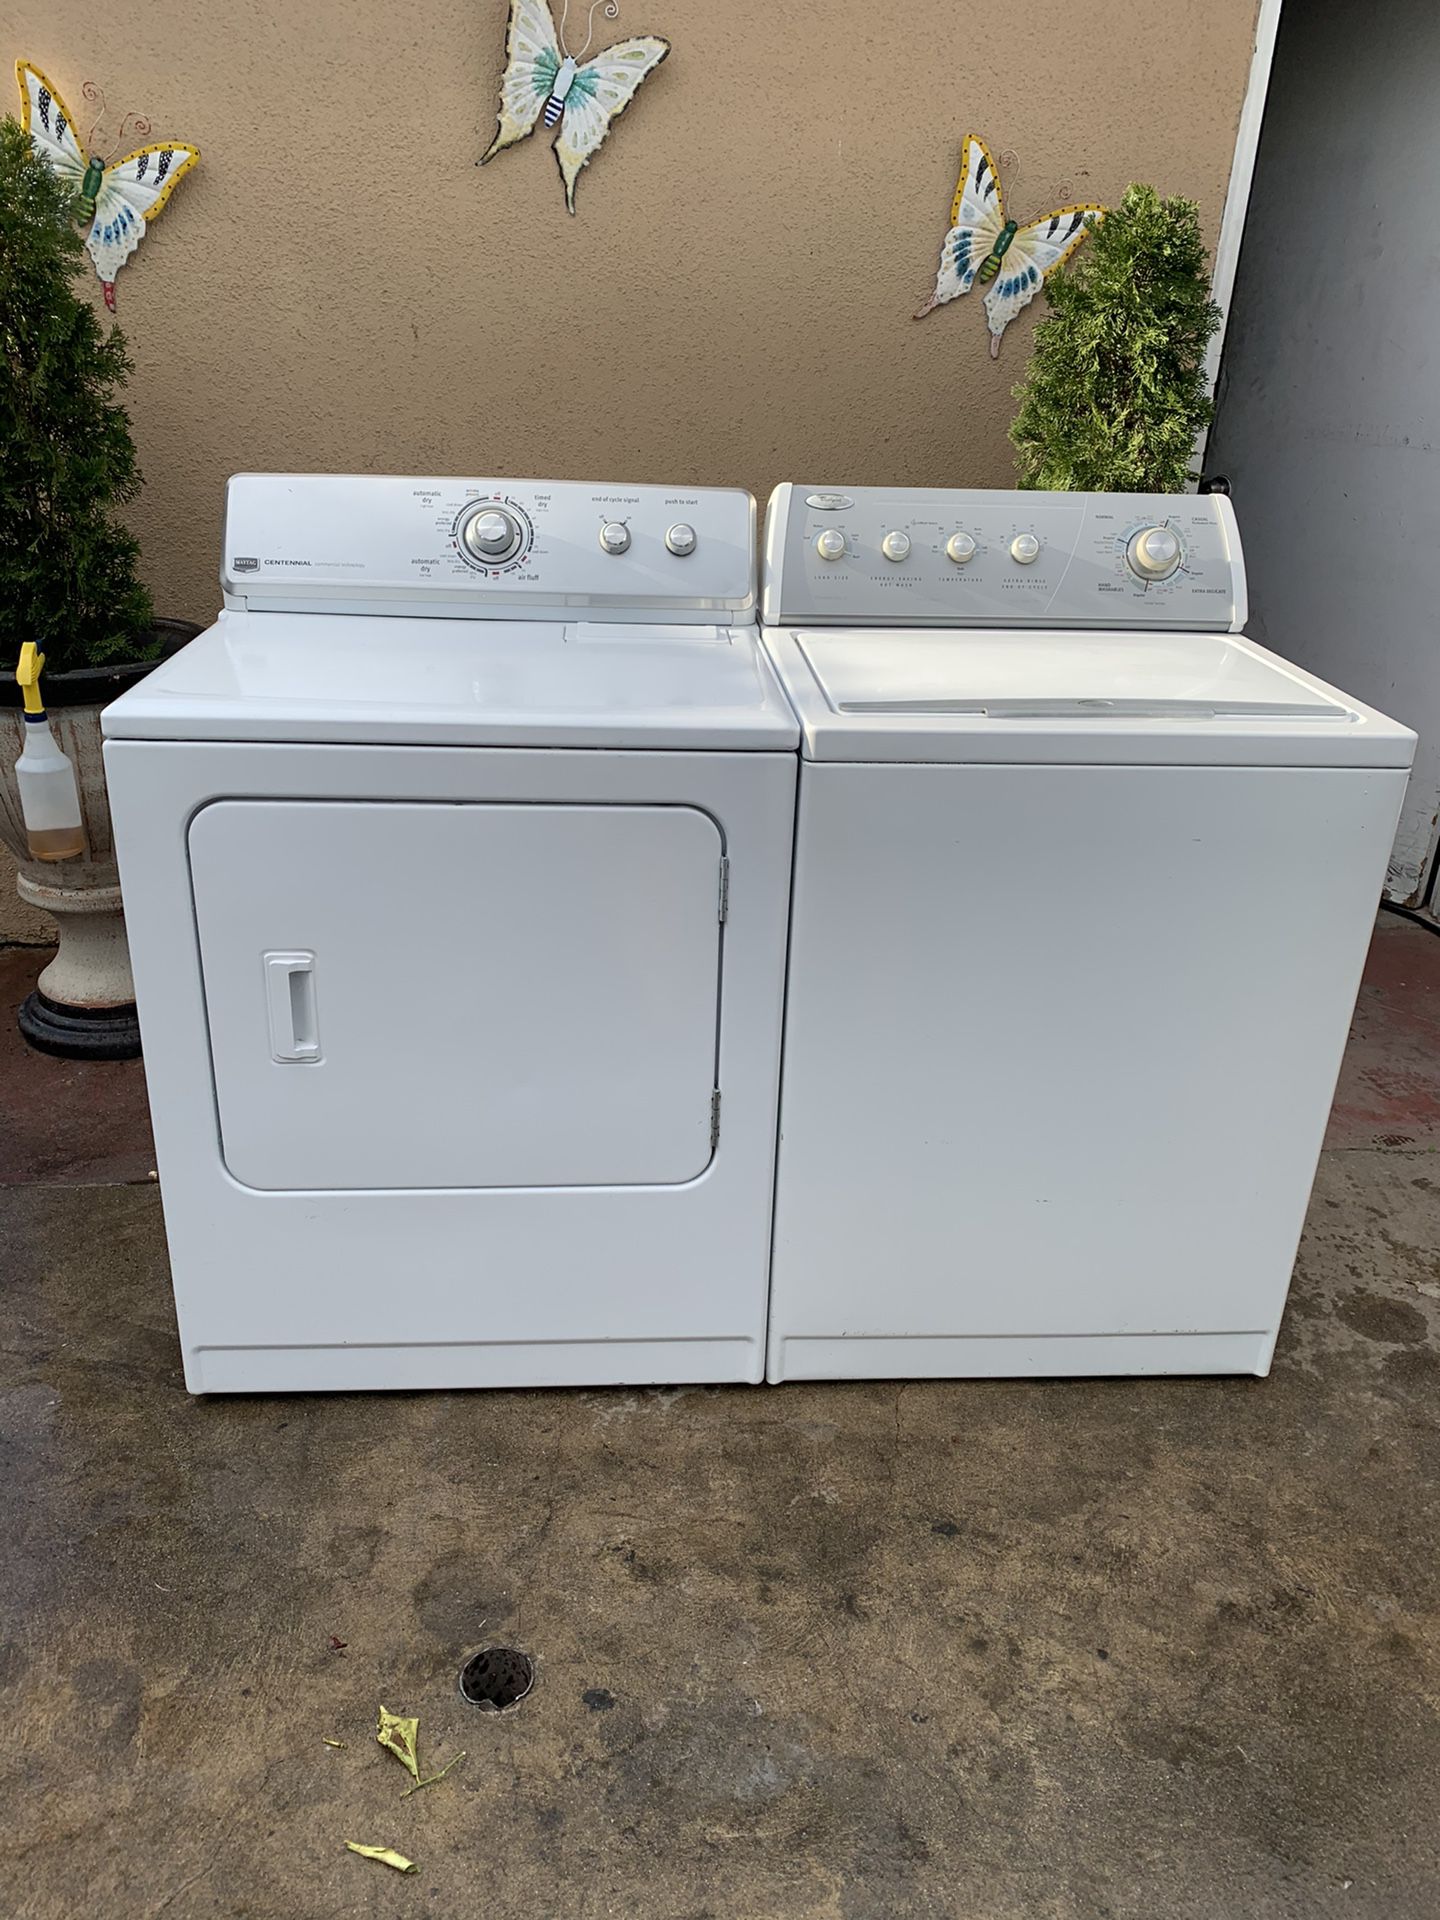 Whirlpool washer and electric dryer set